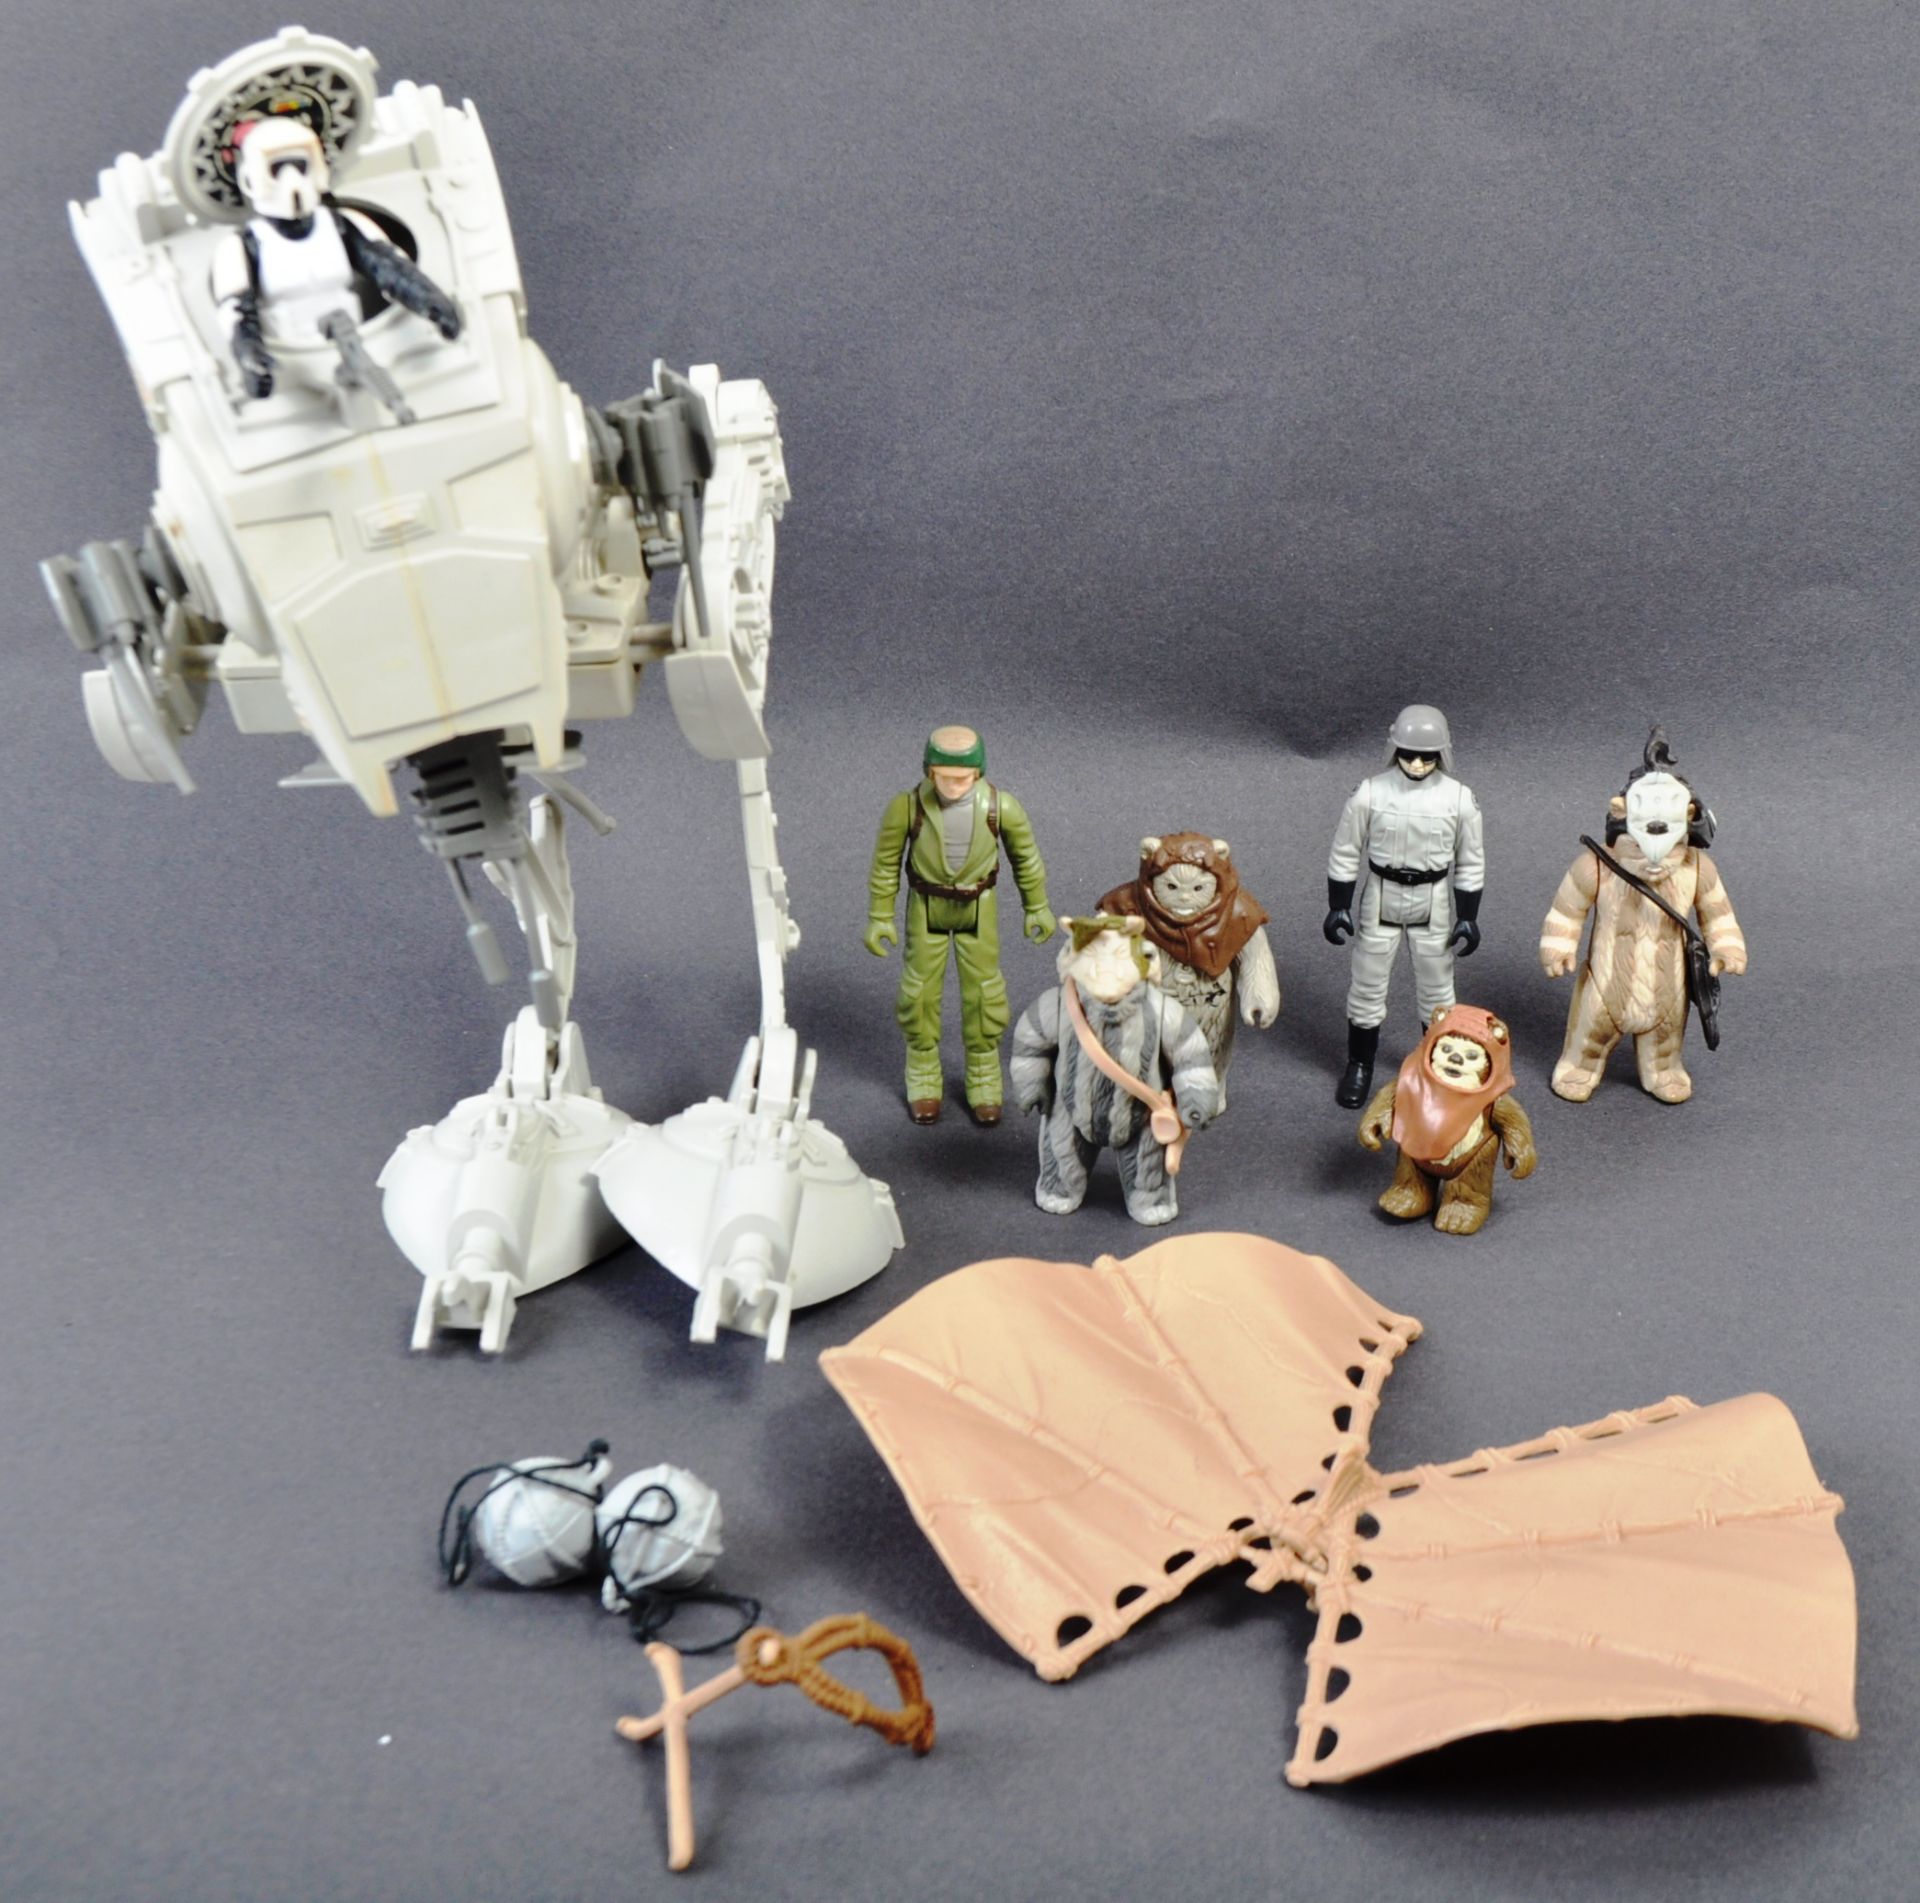 STAR WARS ACTION FIGURES - COLLECTION OF ENDOR RELATED PLAYSETS